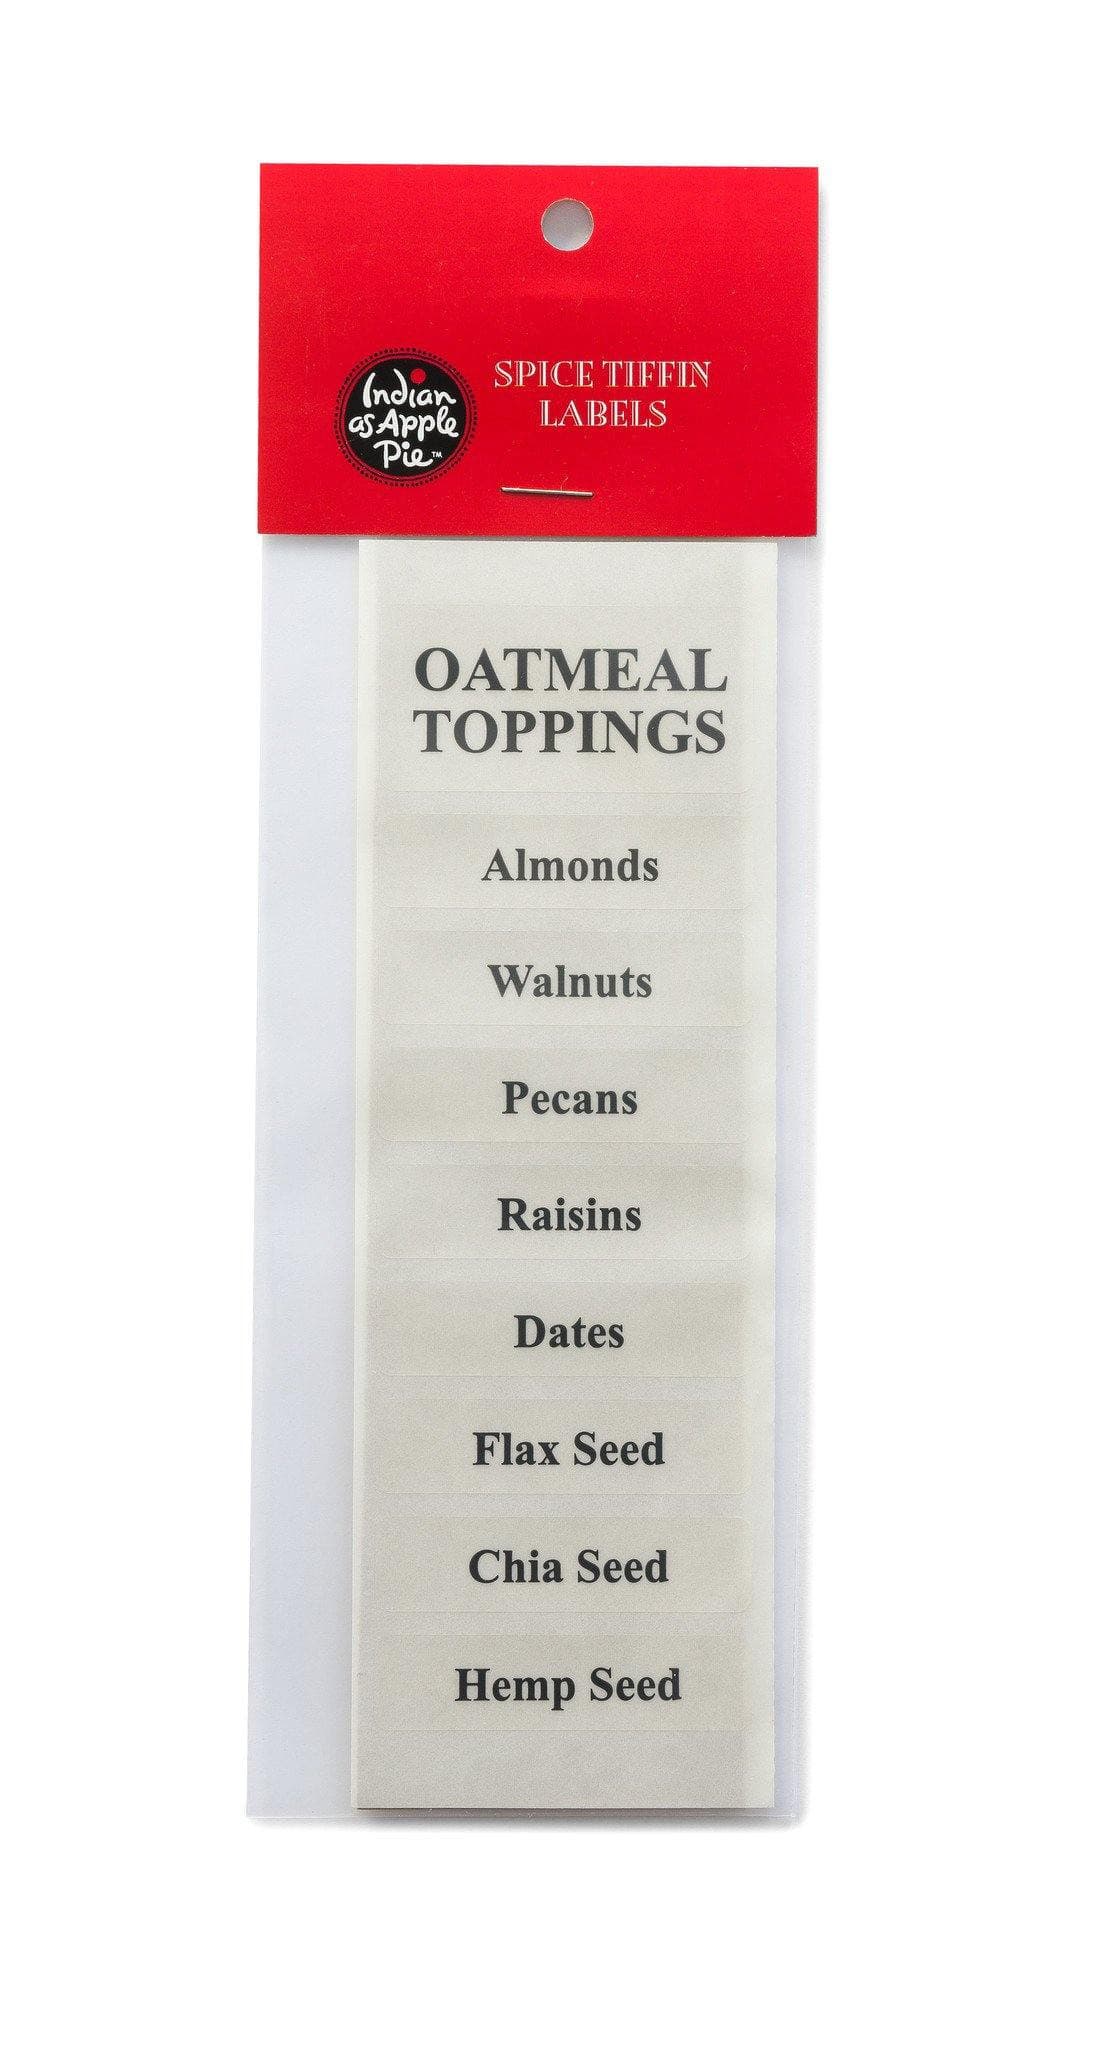 Spice Labels - Oatmeal Toppings - Indian As Apple Pie